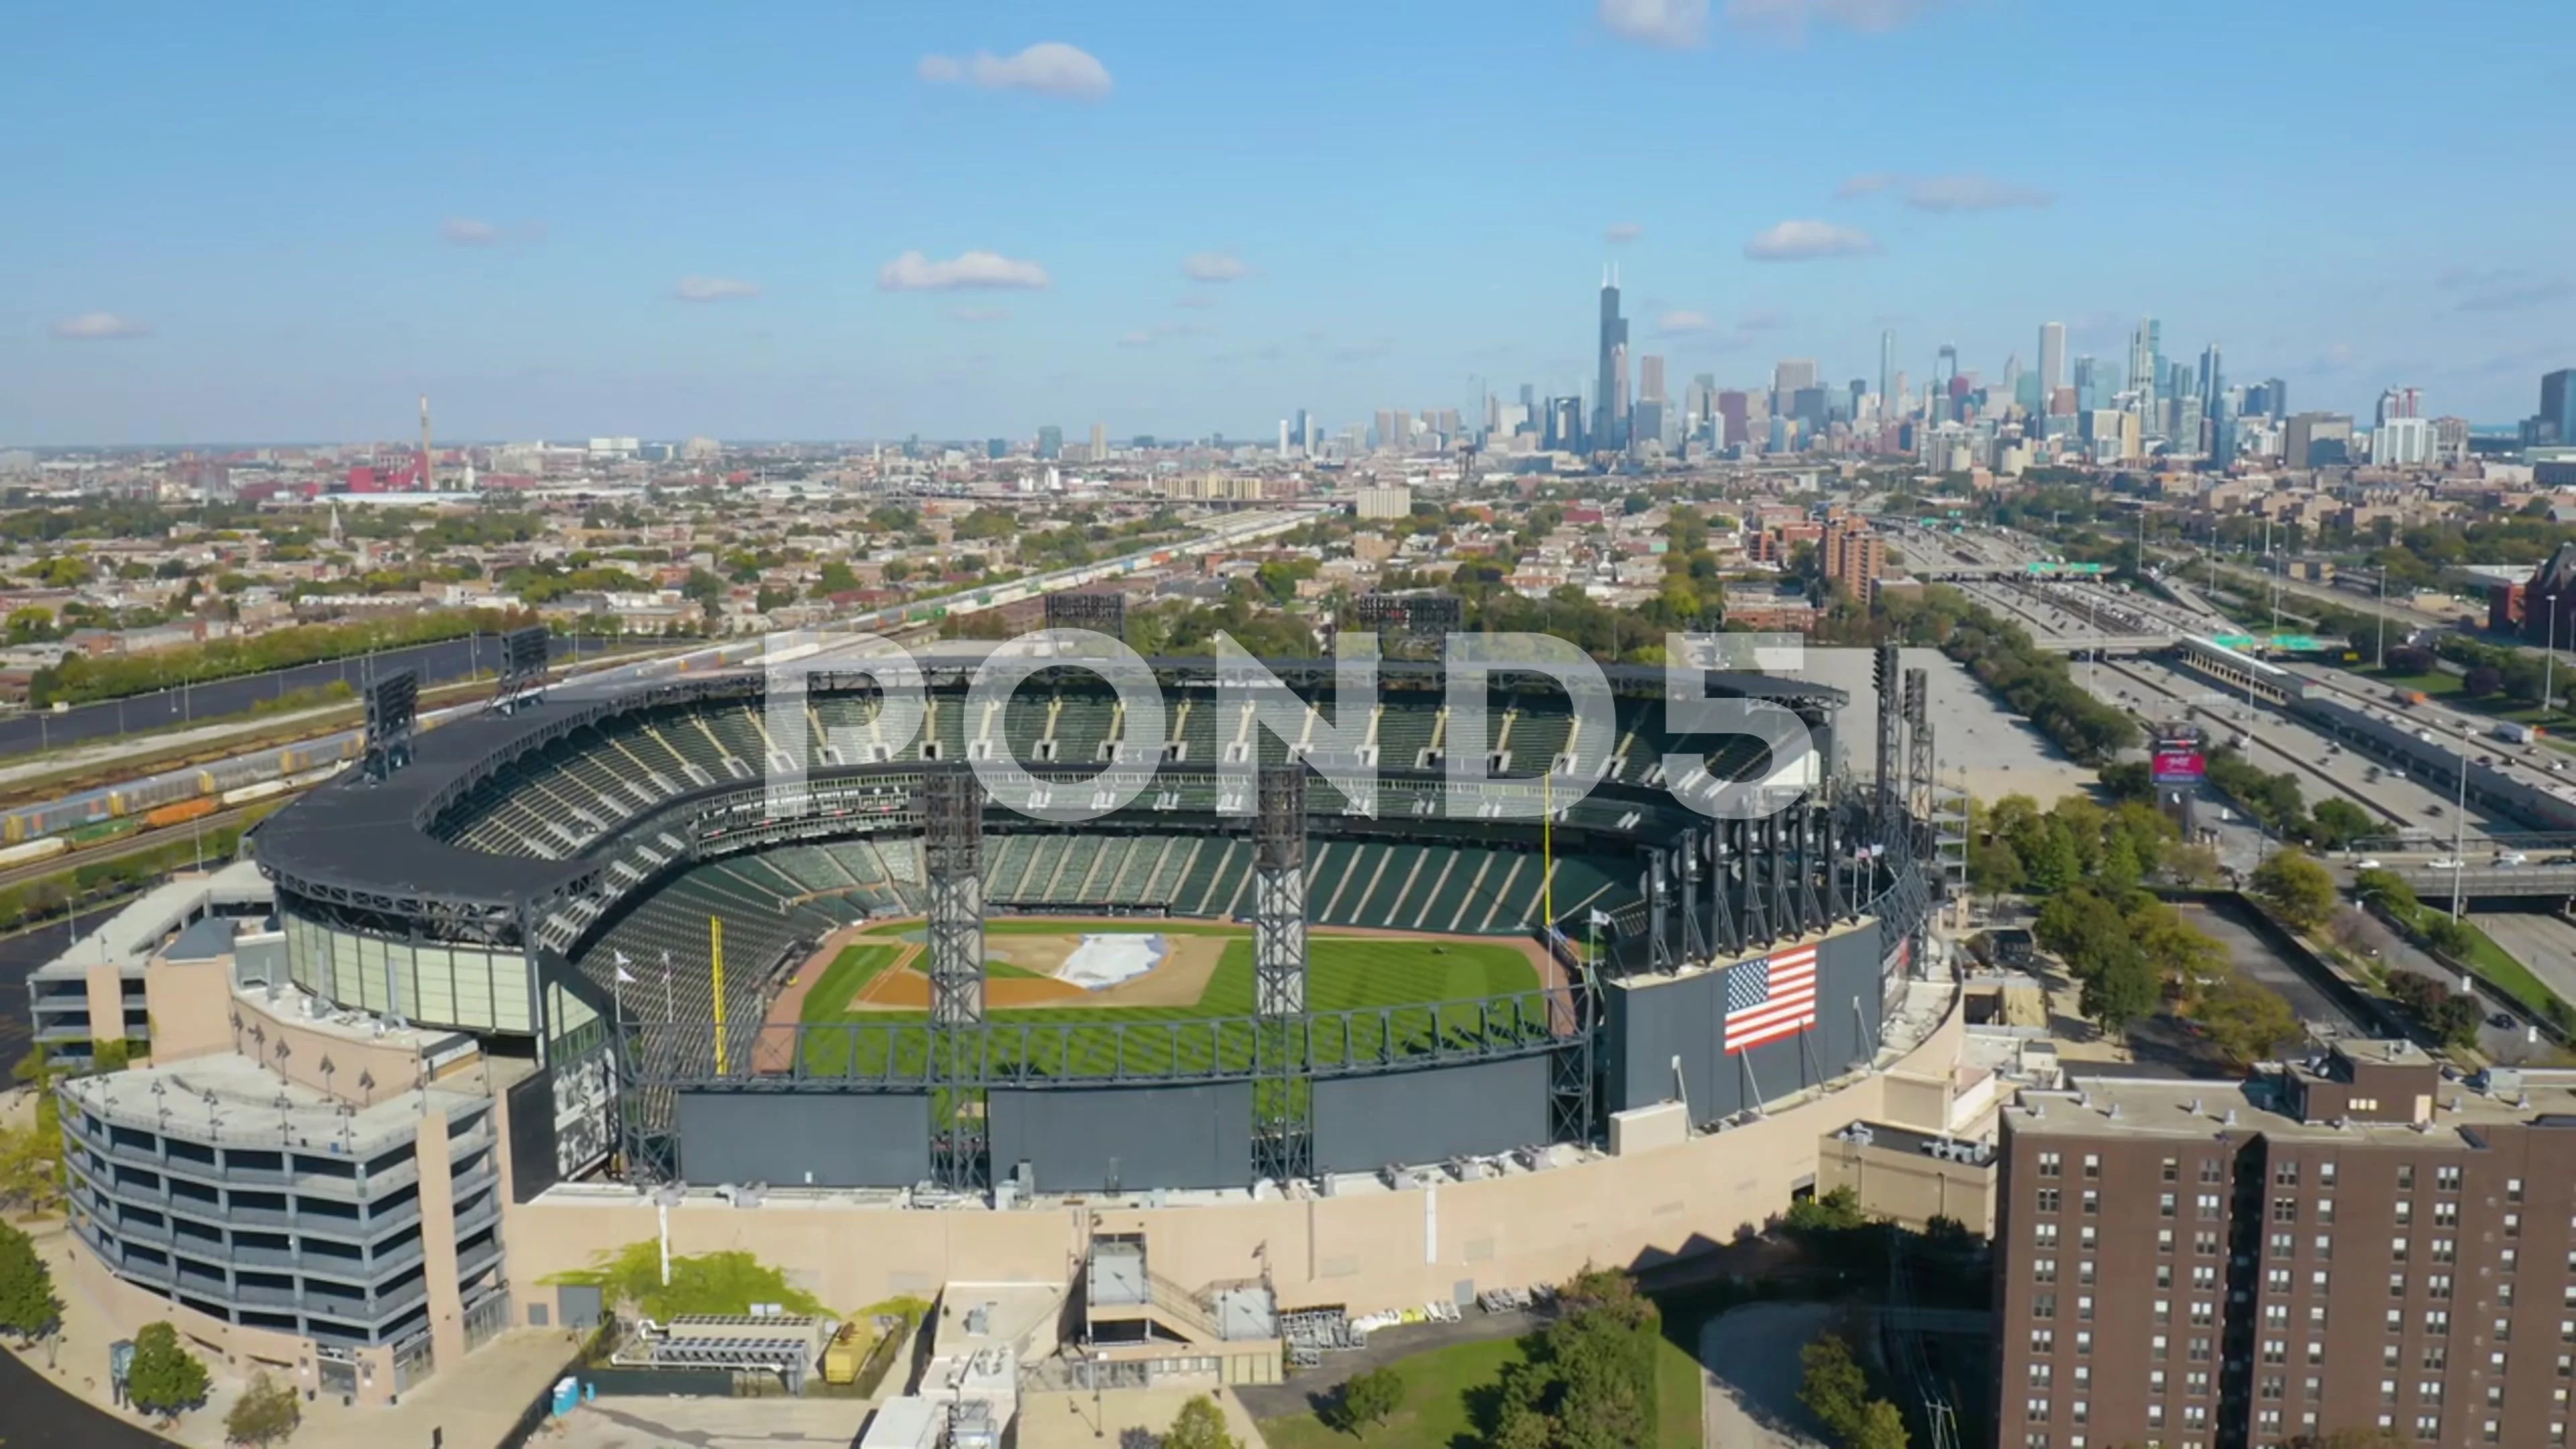 Us Cellular Field Stadium Aerial View In Chicago Stock Photo